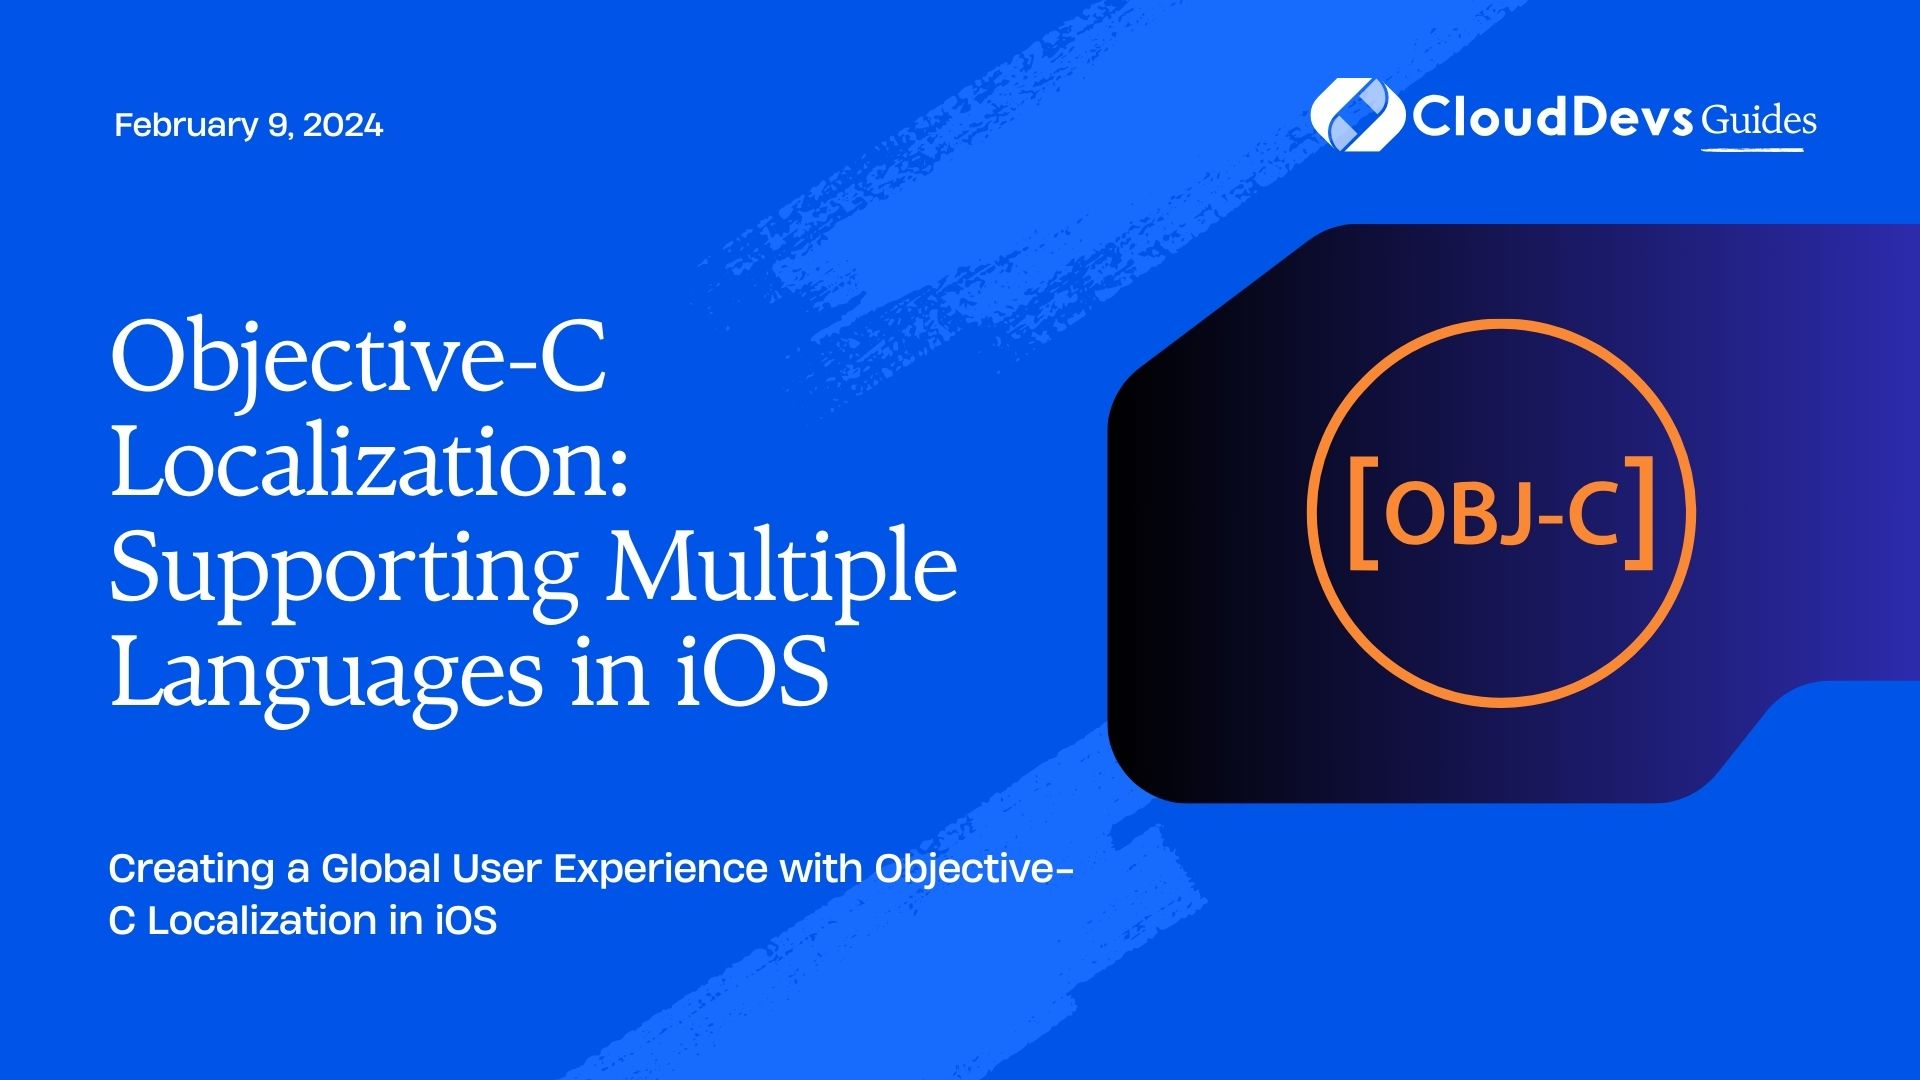 Objective-C Localization: Supporting Multiple Languages in iOS